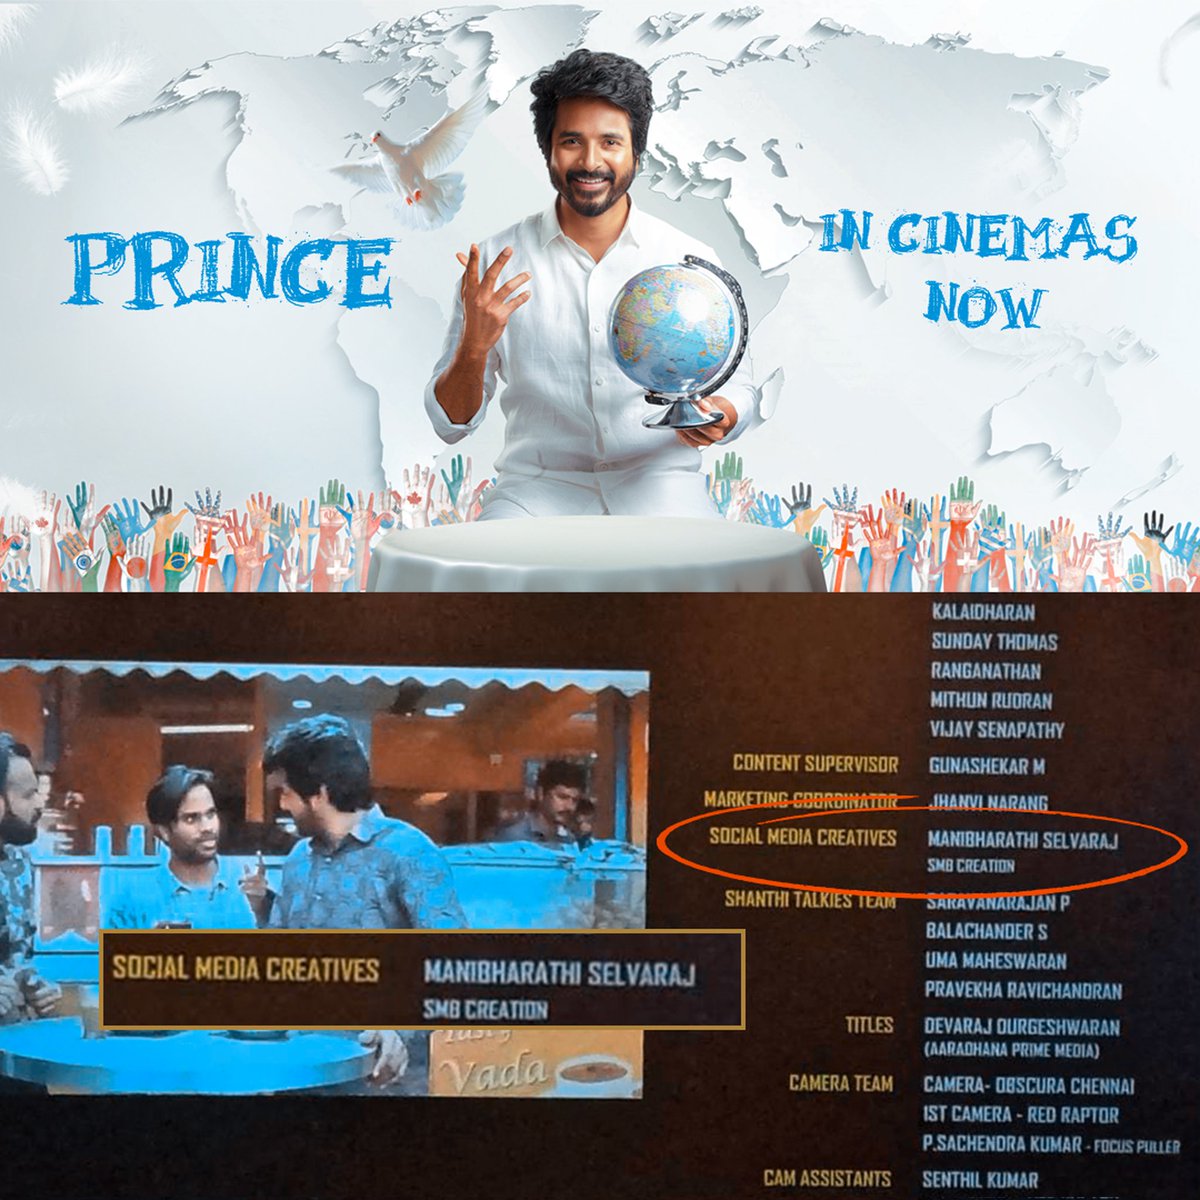 Happy for being part of this project #Prince 🕊️❤️ #PrinceinCinemas Now

#SocialMediaCreatives @smbcreation #SMBcreation

@Siva_Kartikeyan @anudeepfilm @MusicThaman

Thanks for the Trust @SureshProdns @SVCLLP @ShanthiTalkies Team ❤️